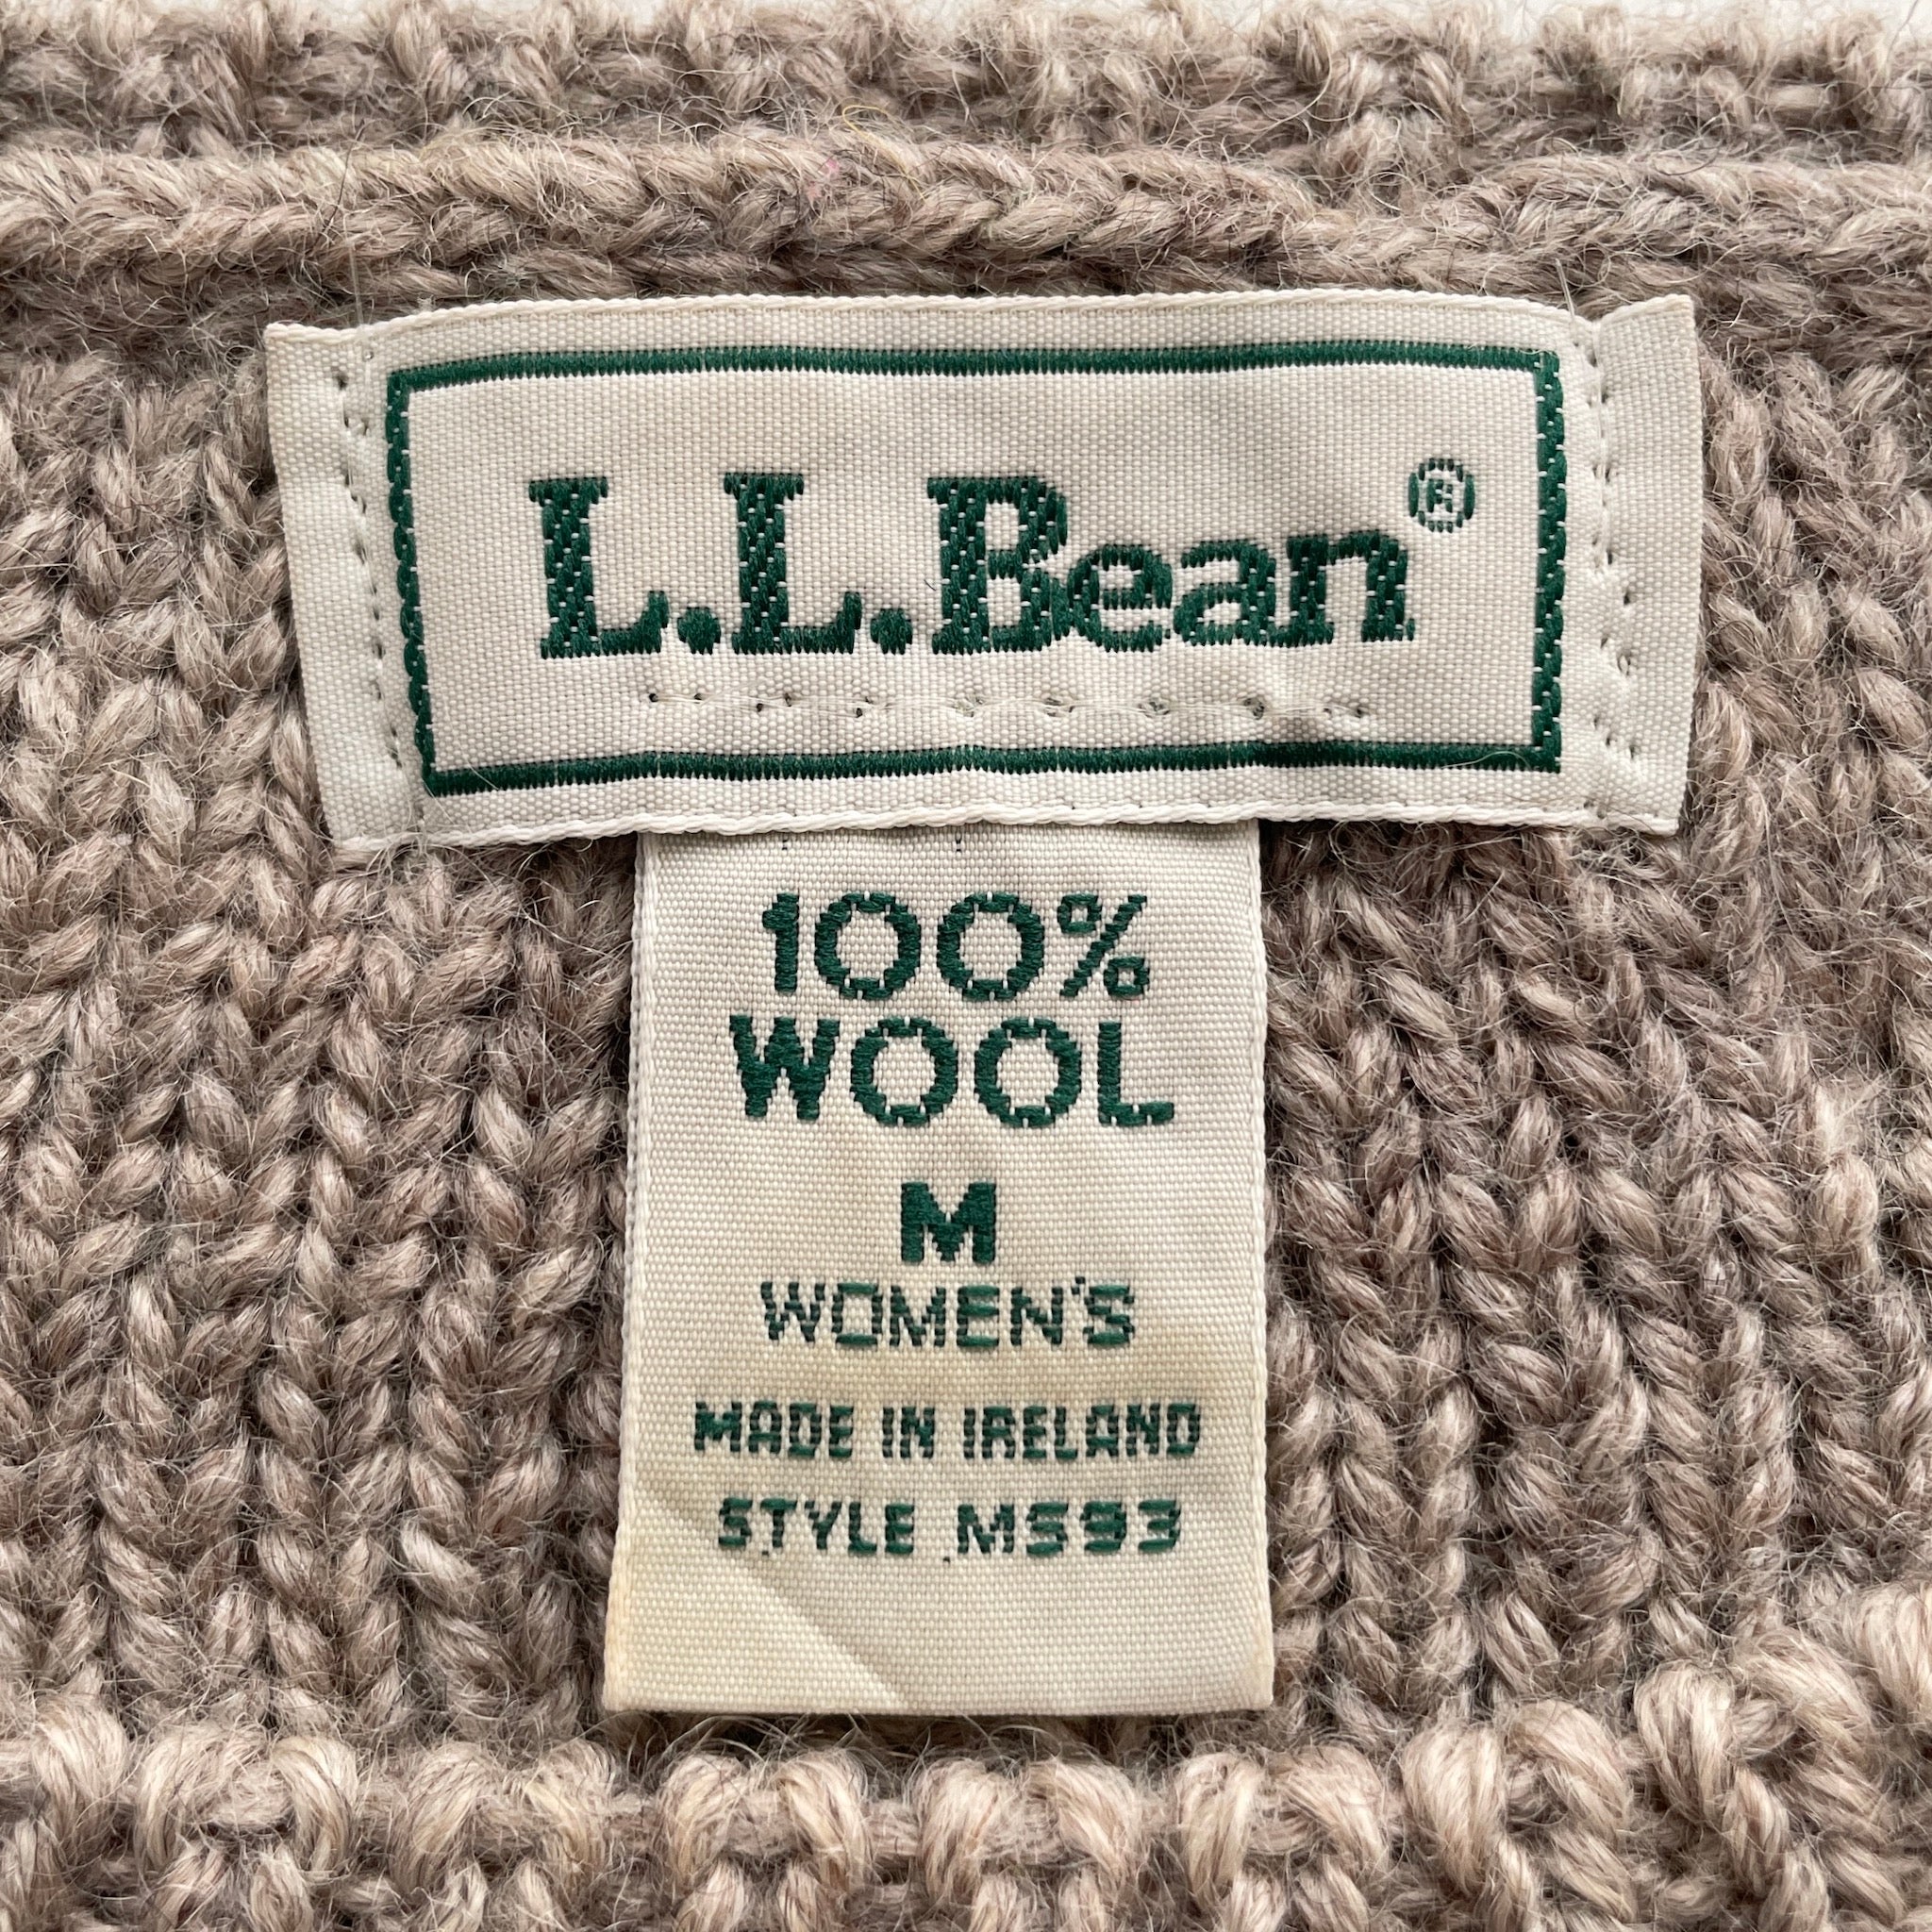 Vintage L.L. Bean Taupe Wool Cable Knit Sweater Made in Ireland M